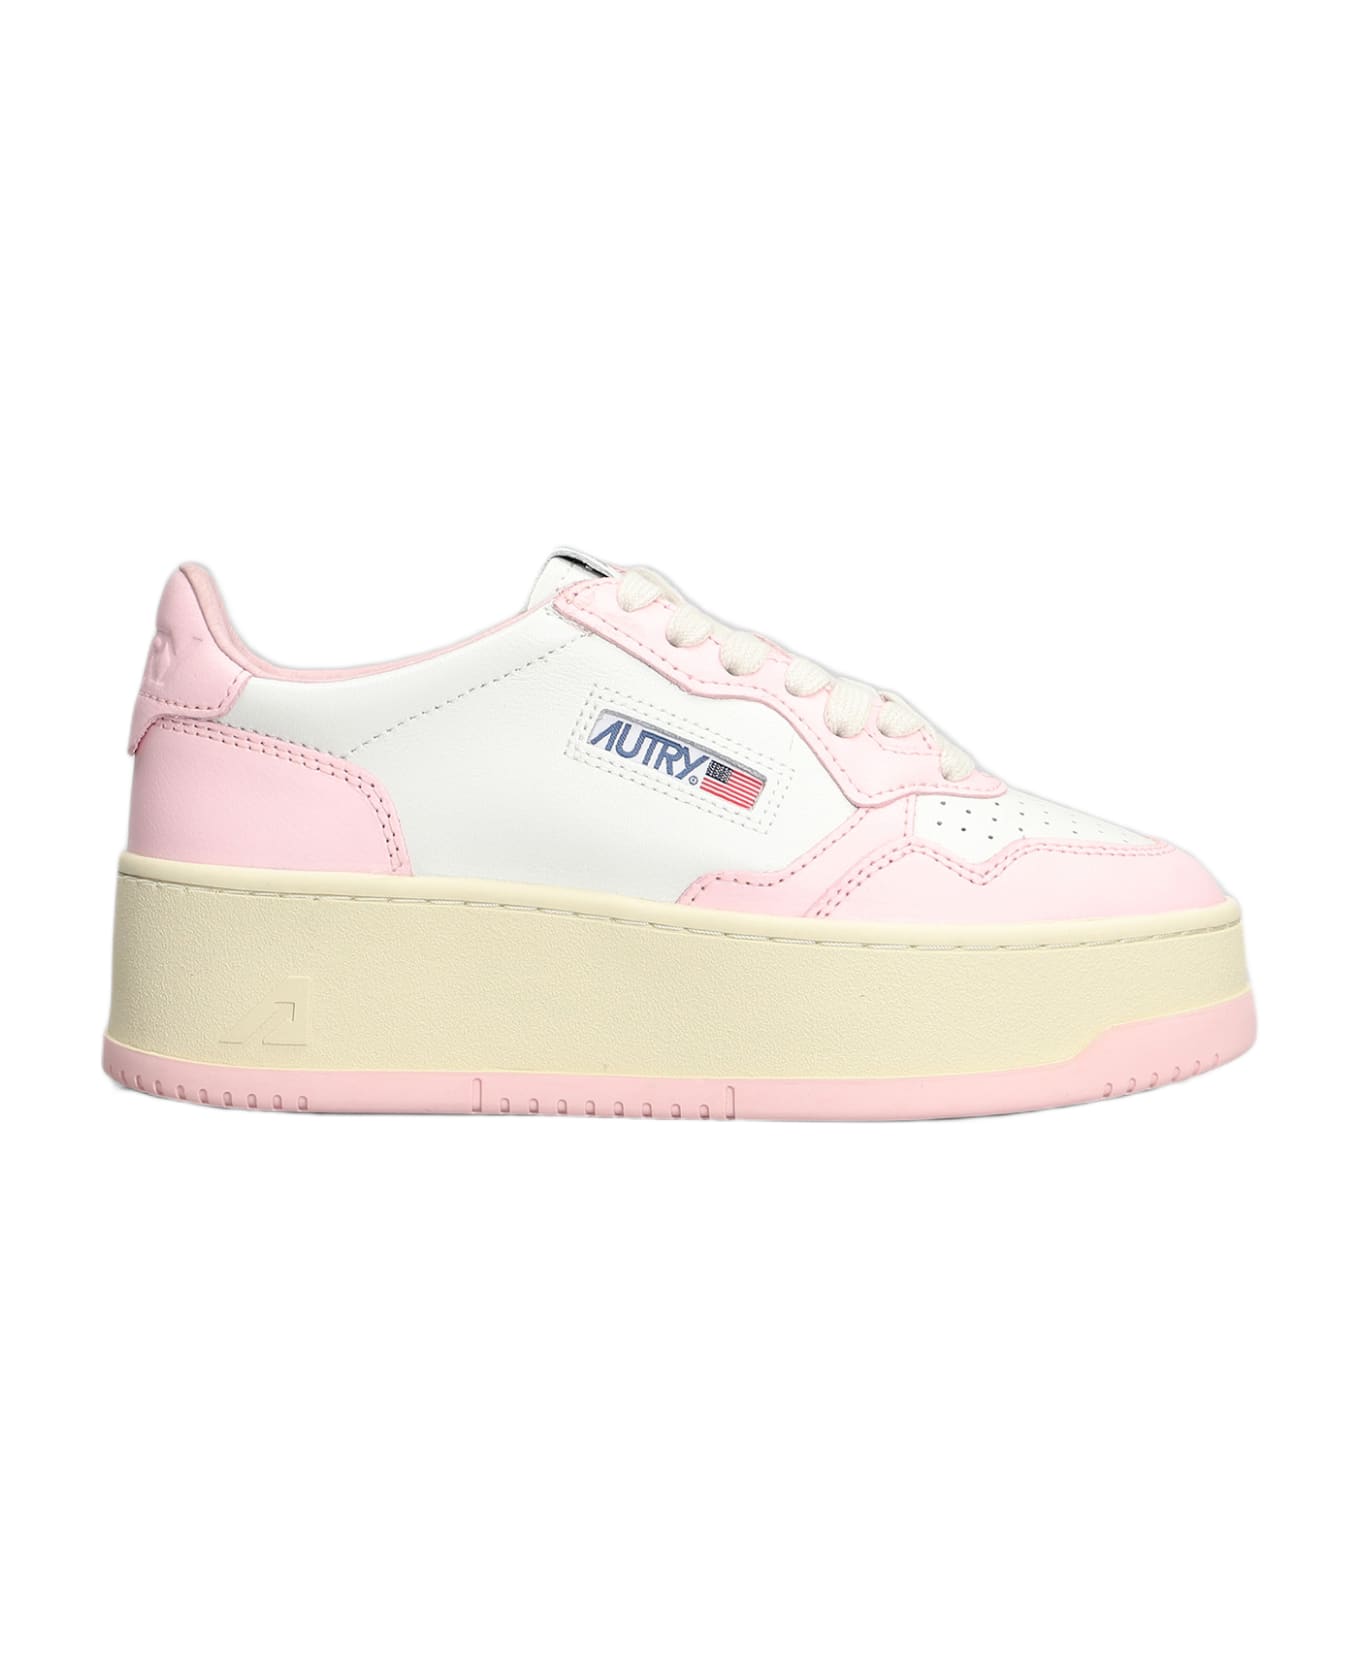 Autry Platform Low Sneakers In White Leather - Pink ウェッジシューズ